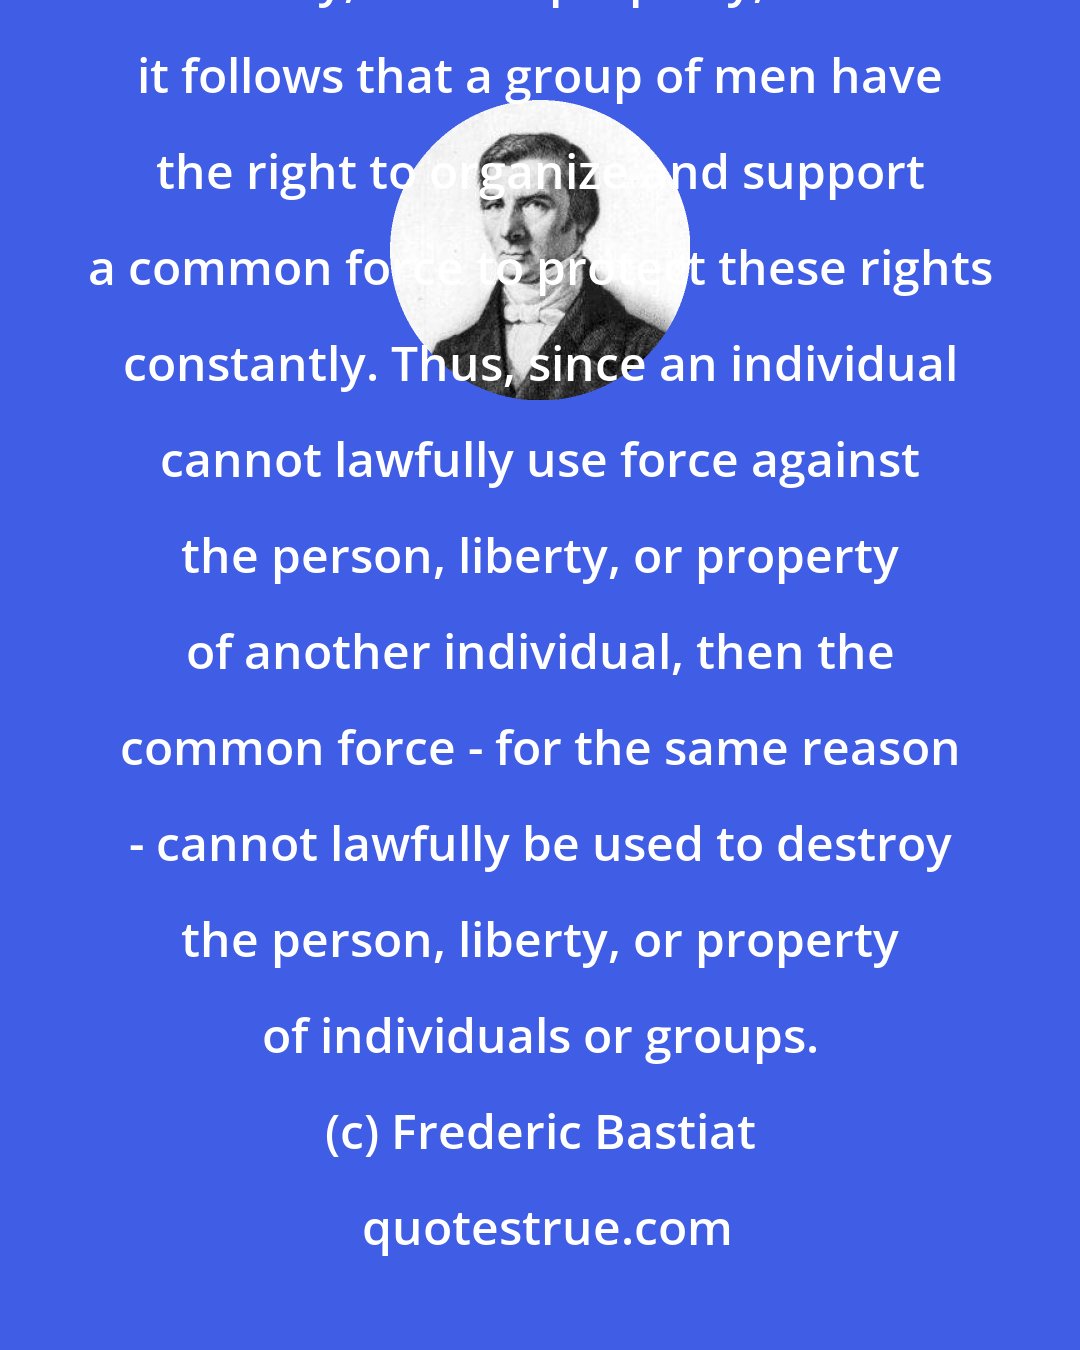 Frederic Bastiat: If every person has the right to defend - even by force - his person, his liberty, and his property, then it follows that a group of men have the right to organize and support a common force to protect these rights constantly. Thus, since an individual cannot lawfully use force against the person, liberty, or property of another individual, then the common force - for the same reason - cannot lawfully be used to destroy the person, liberty, or property of individuals or groups.